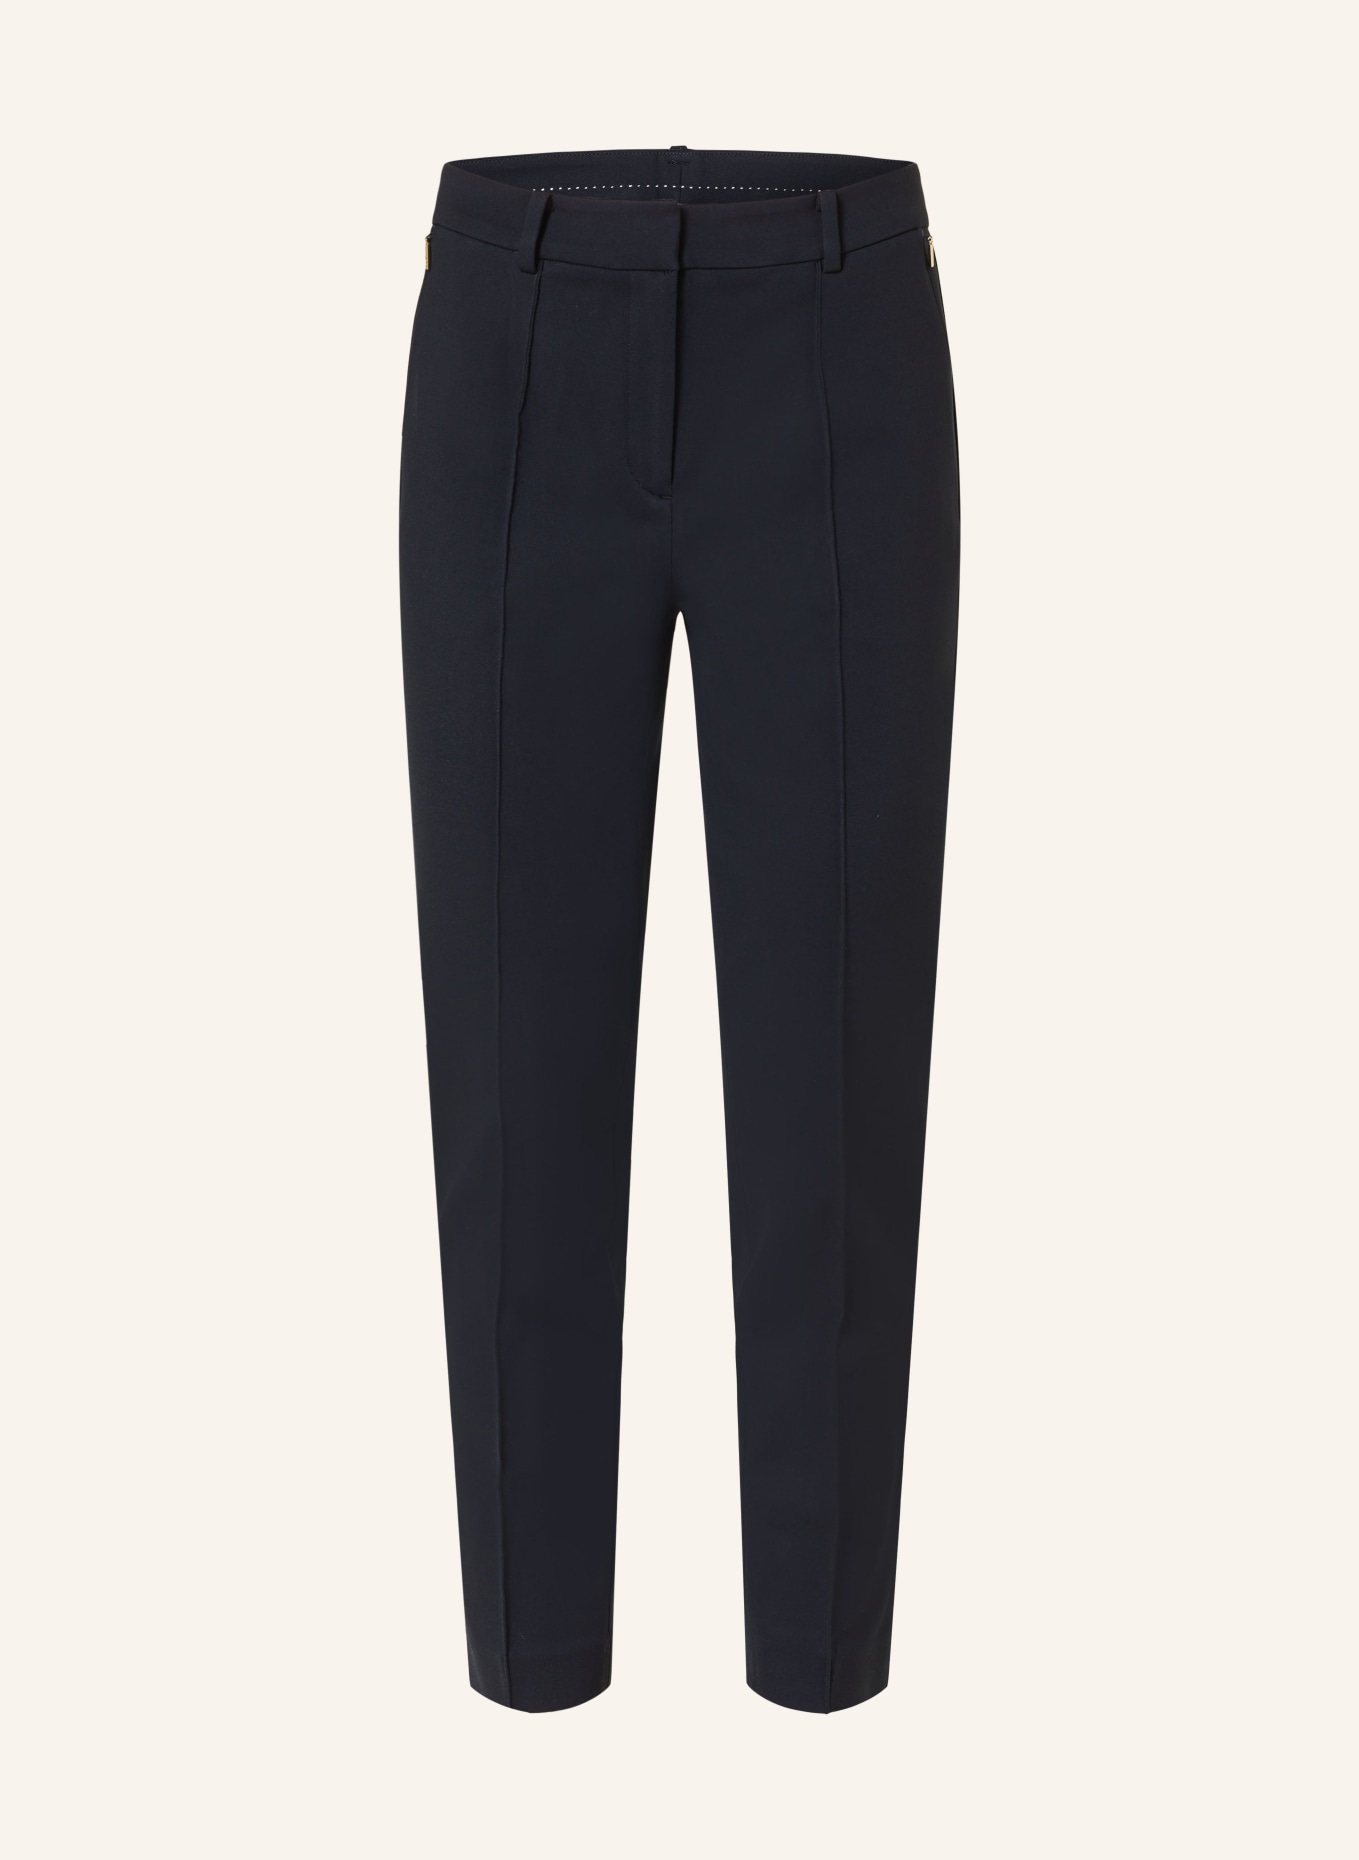 JOOP! 7/8 trousers made of jersey, Color: DARK BLUE (Image 1)